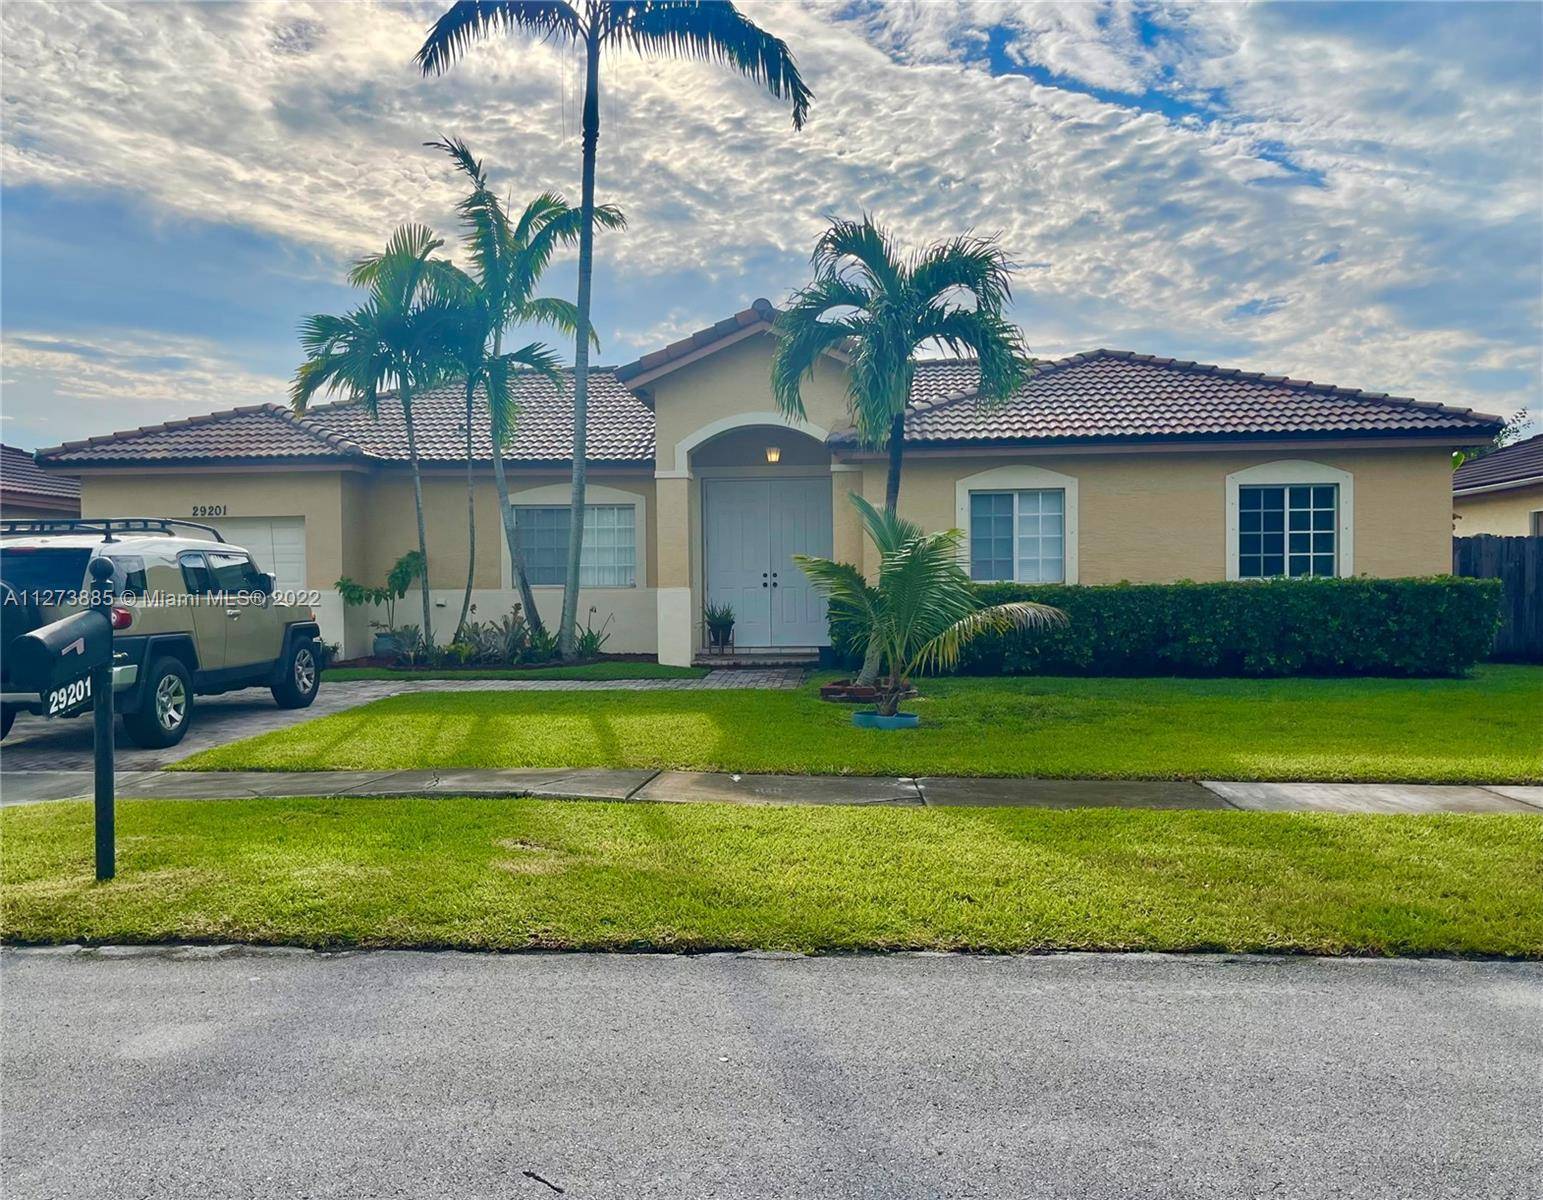 Beautiful 3 bed 2 bath Single Family Home in the popular Biscayne Drive Estates and NO HOA, which is a BLESSING !